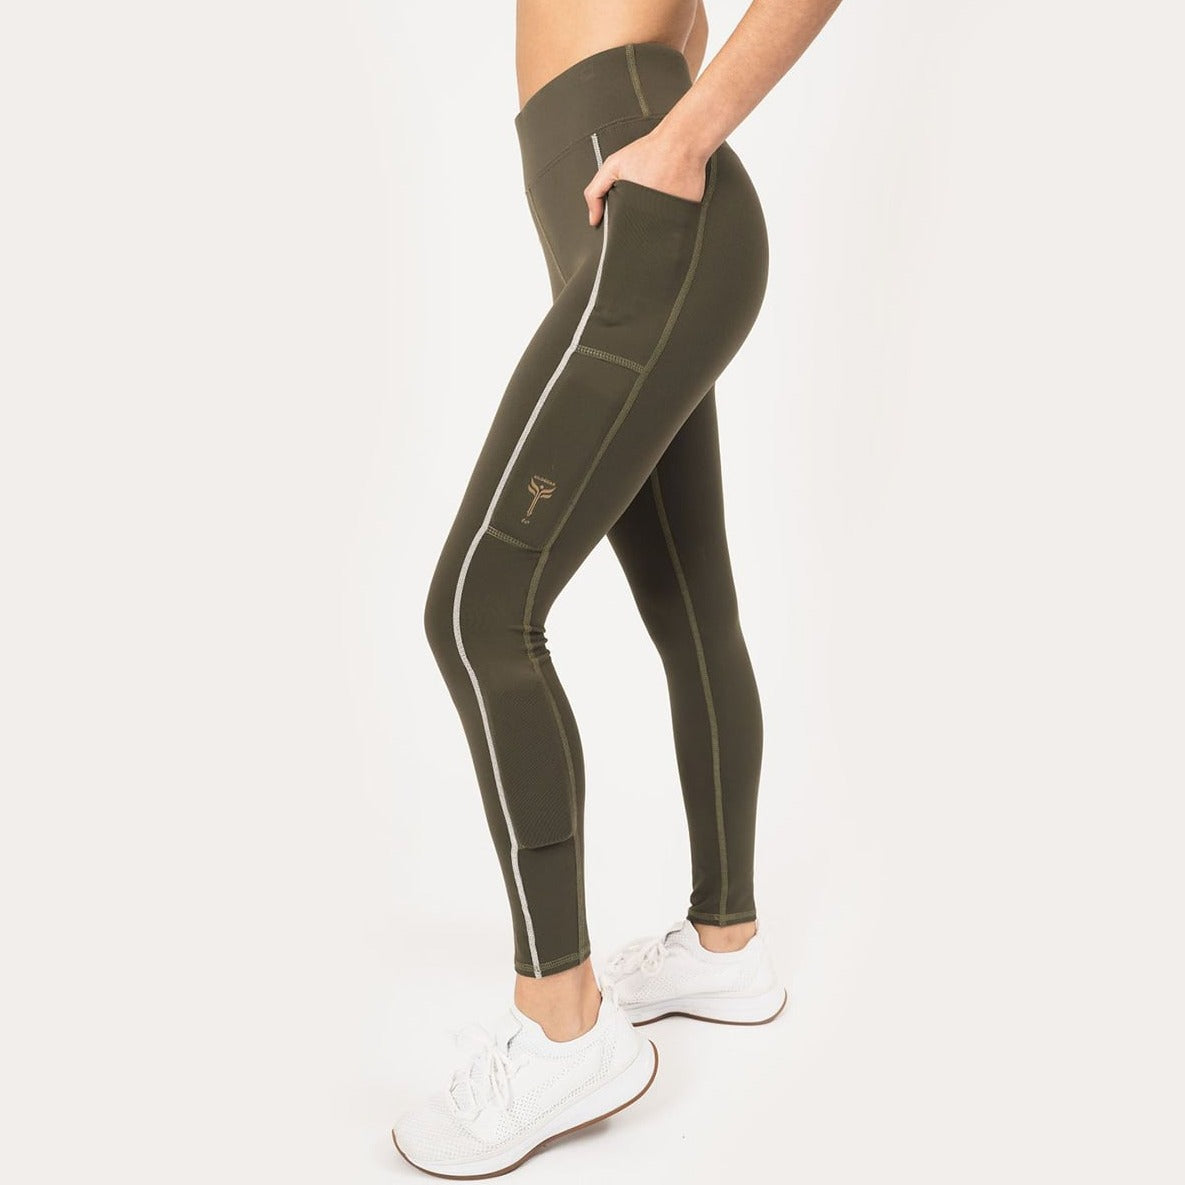 What Are The Leggings With Holes Called